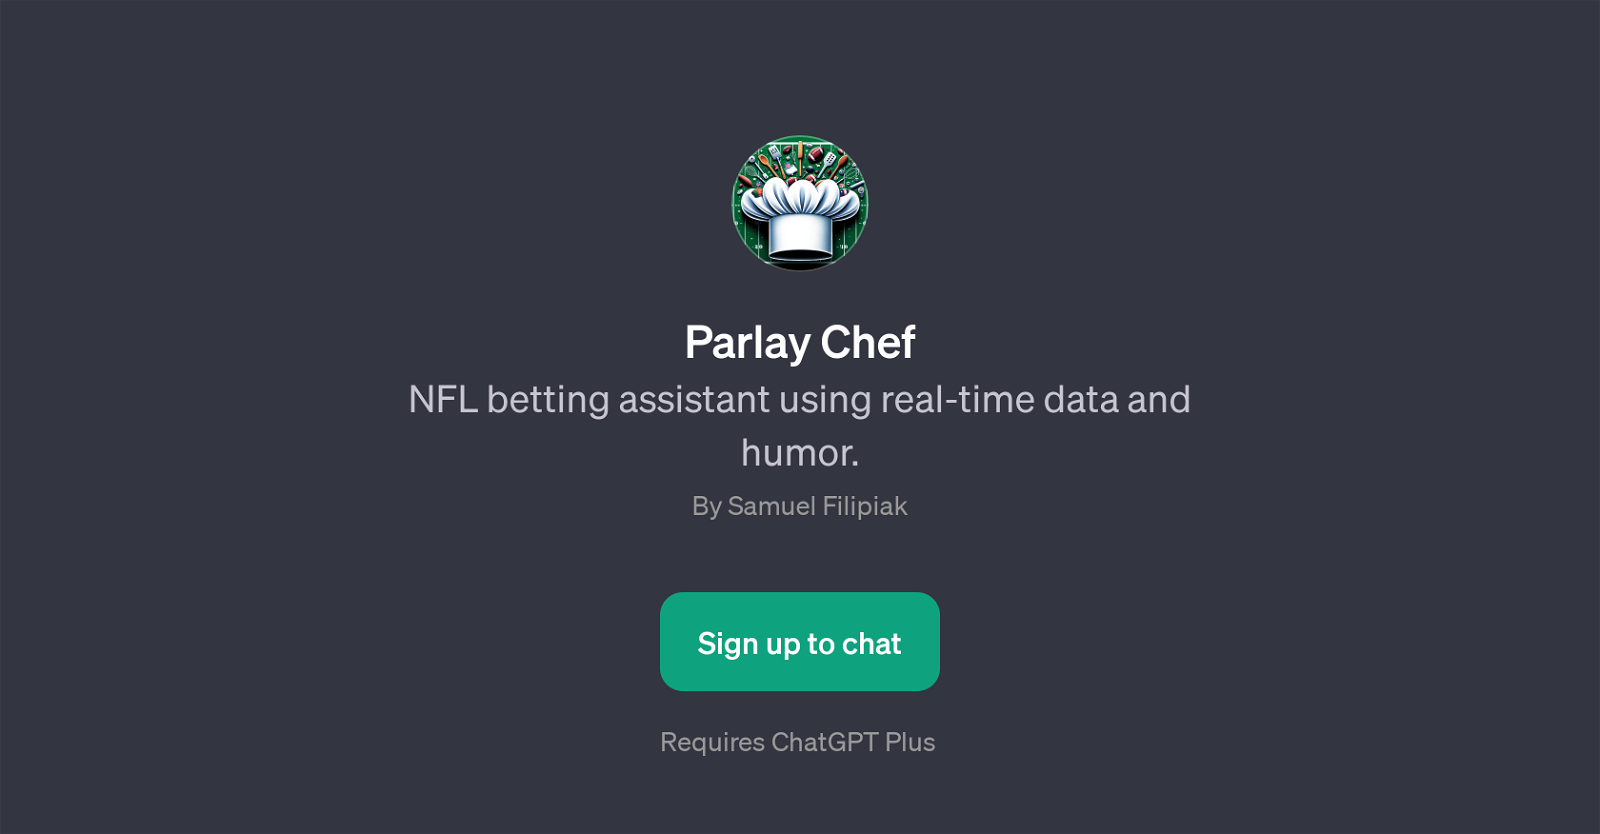 Parlay Chef website